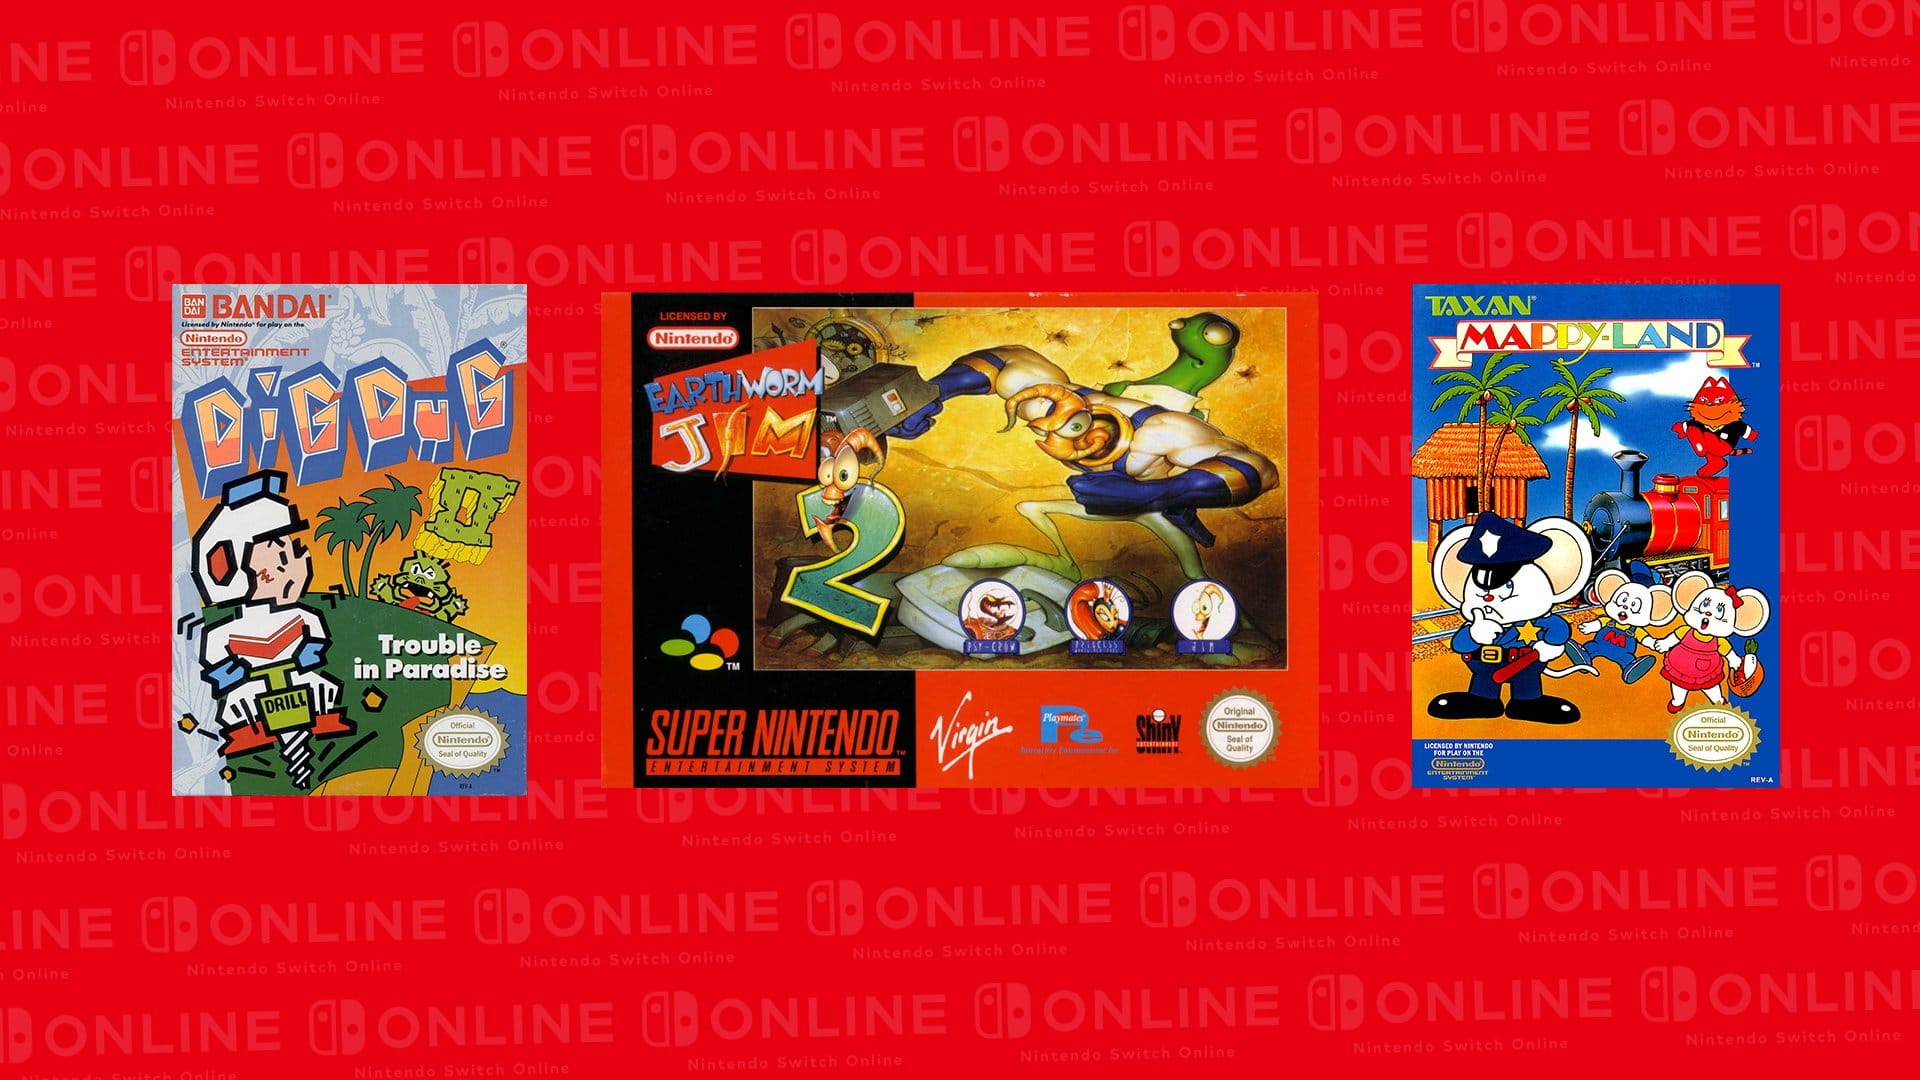 Mappy-Land,' 'Dig Dug II' and 'Earthworm Jim 2' come to Nintendo Switch  Online